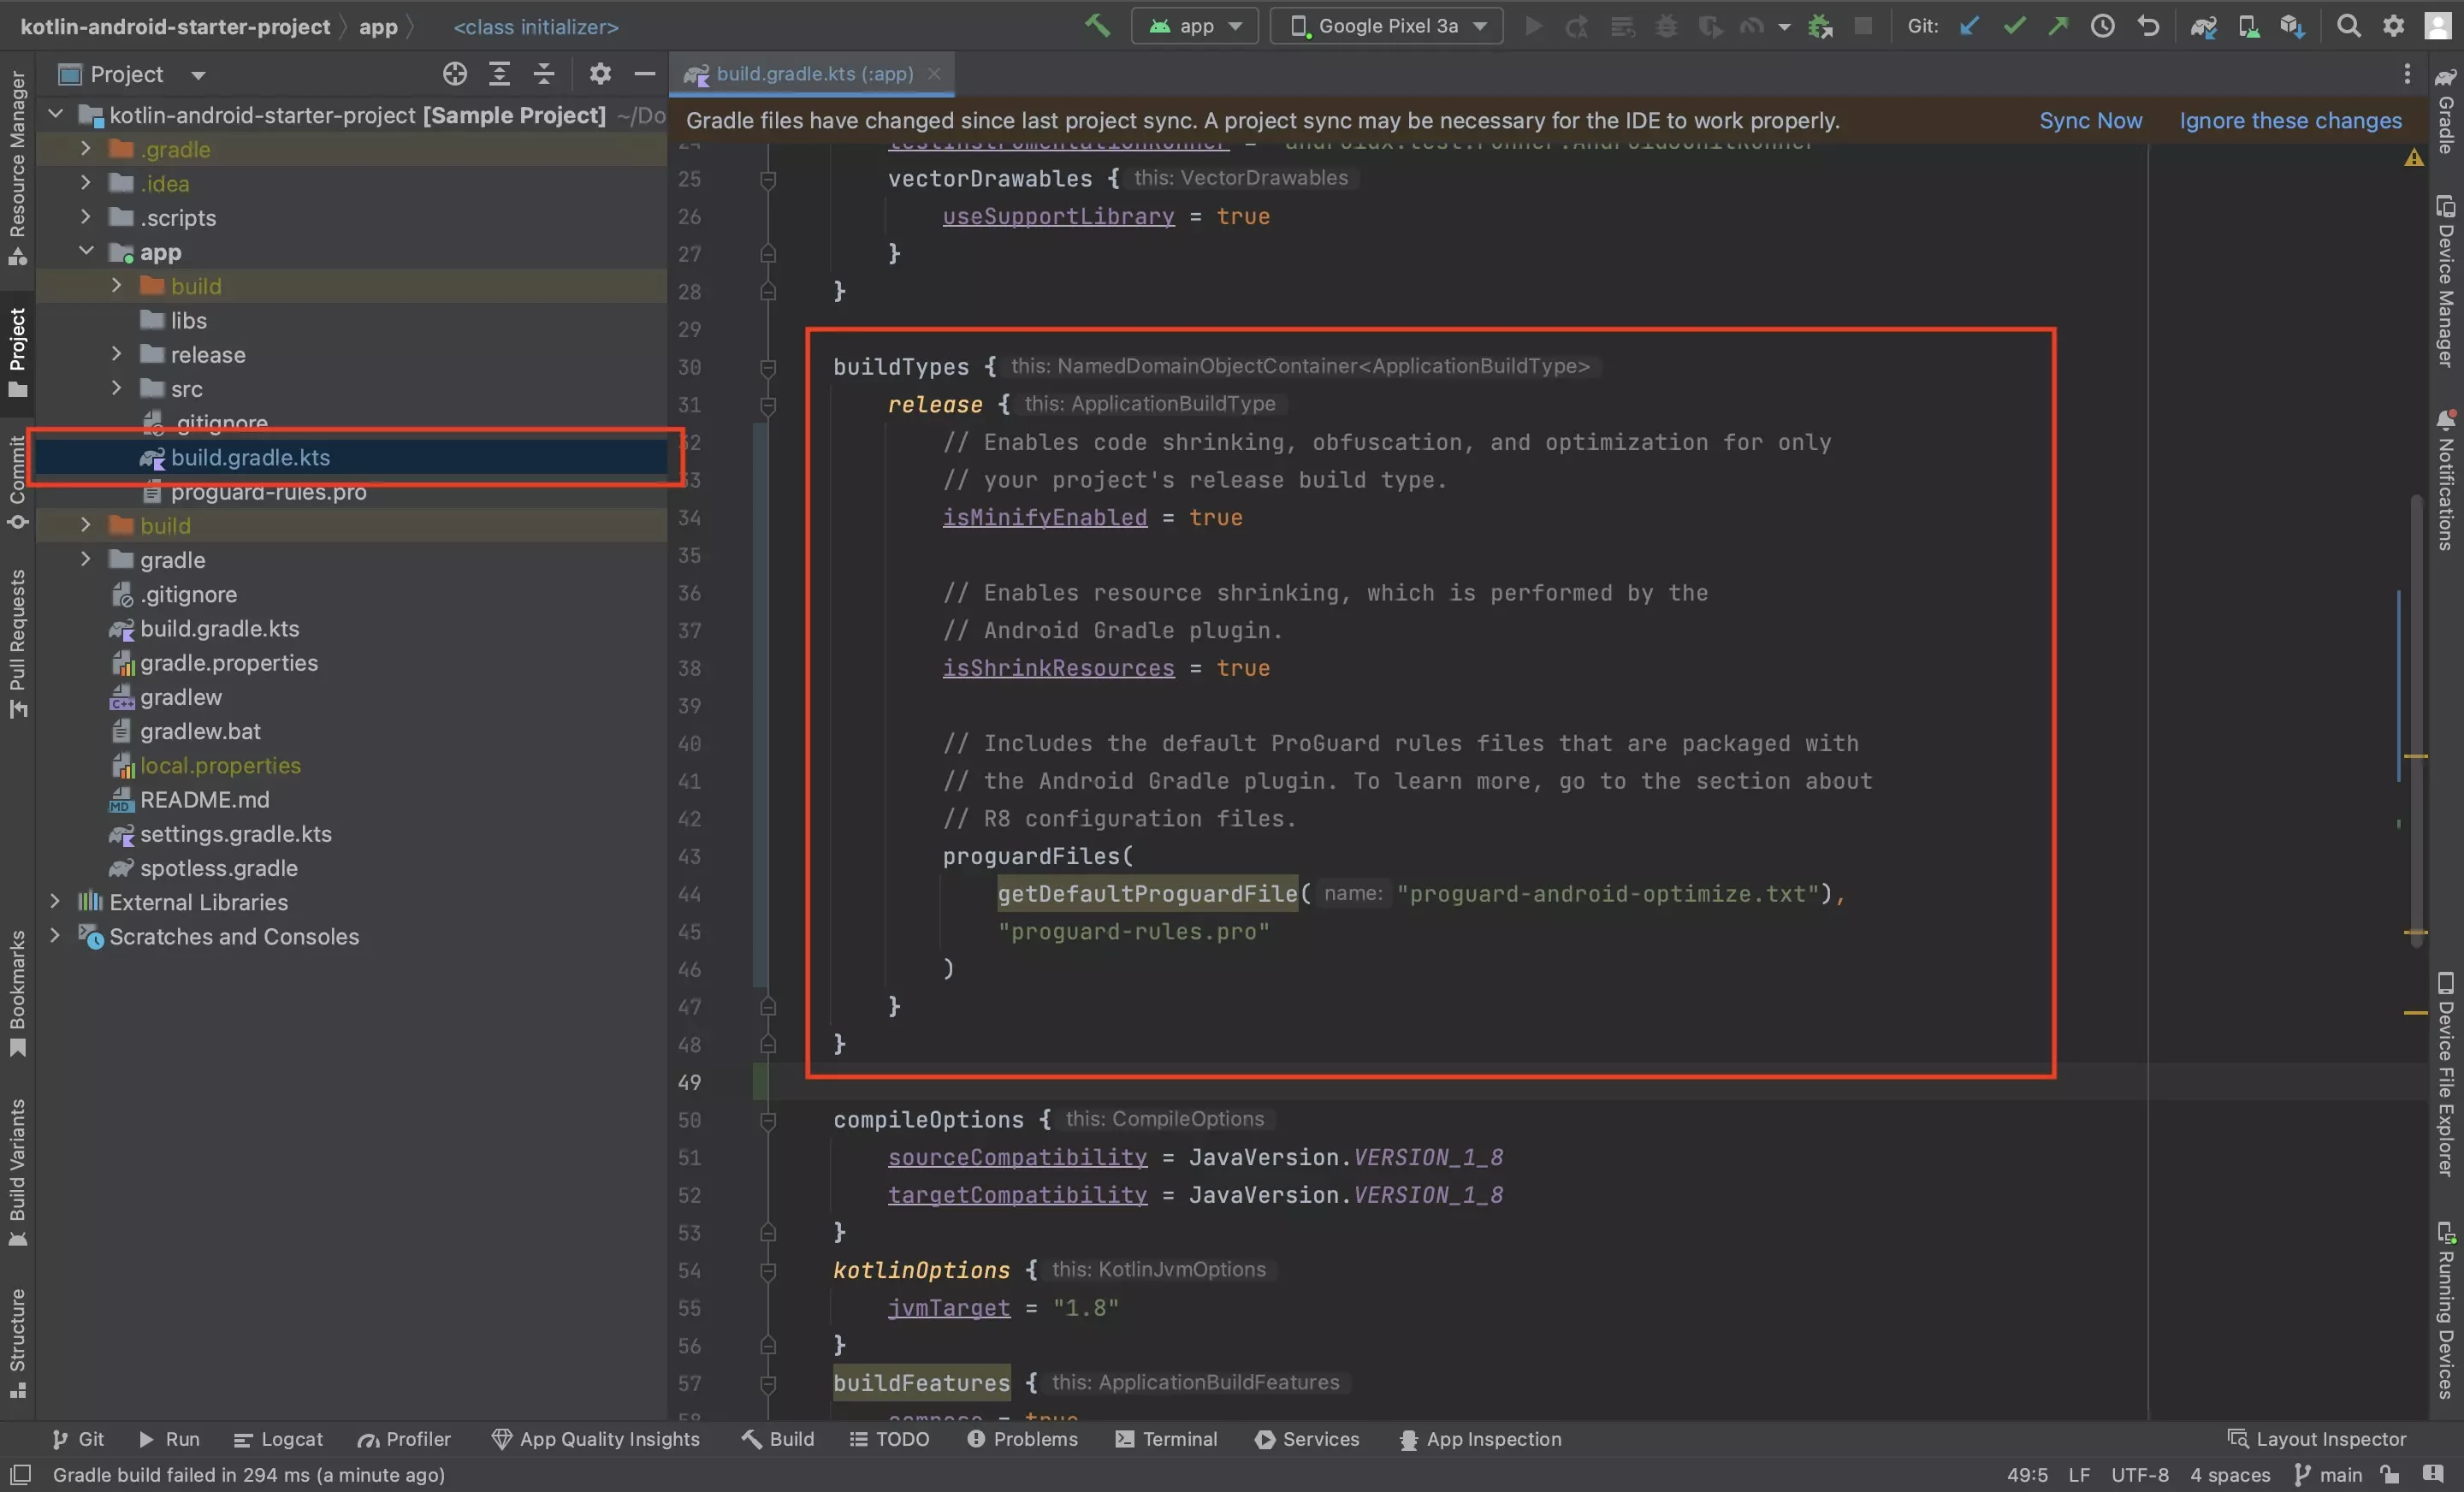 A screenshot of Android Studio showing the app level build.gradle.kts file with the updated code that is provided below.